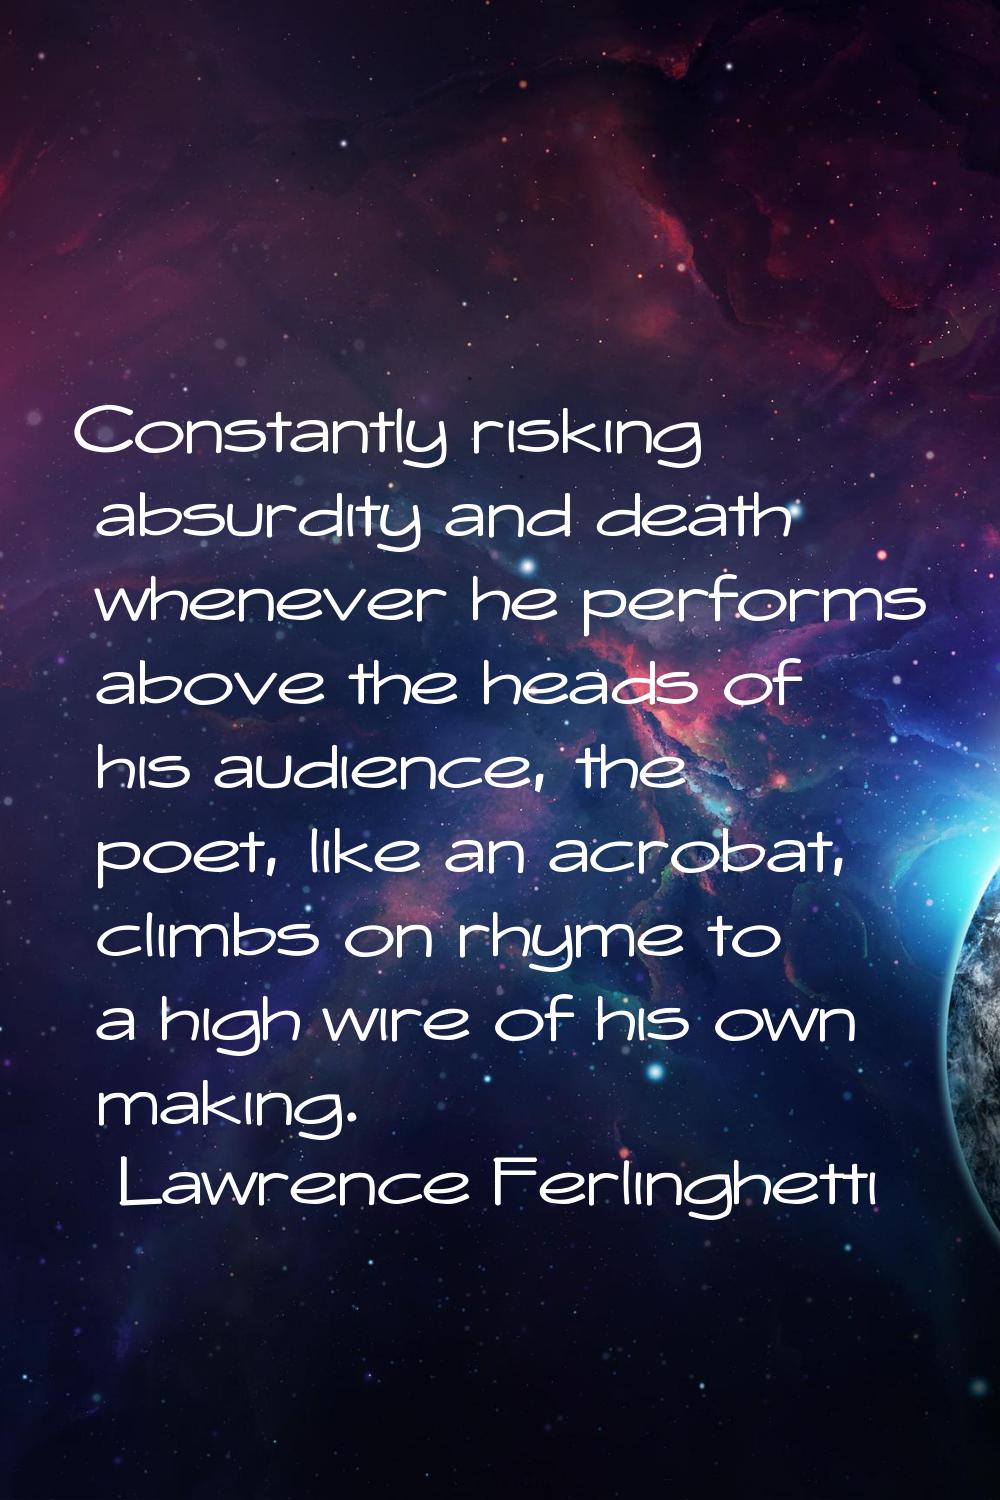 Constantly risking absurdity and death whenever he performs above the heads of his audience, the po